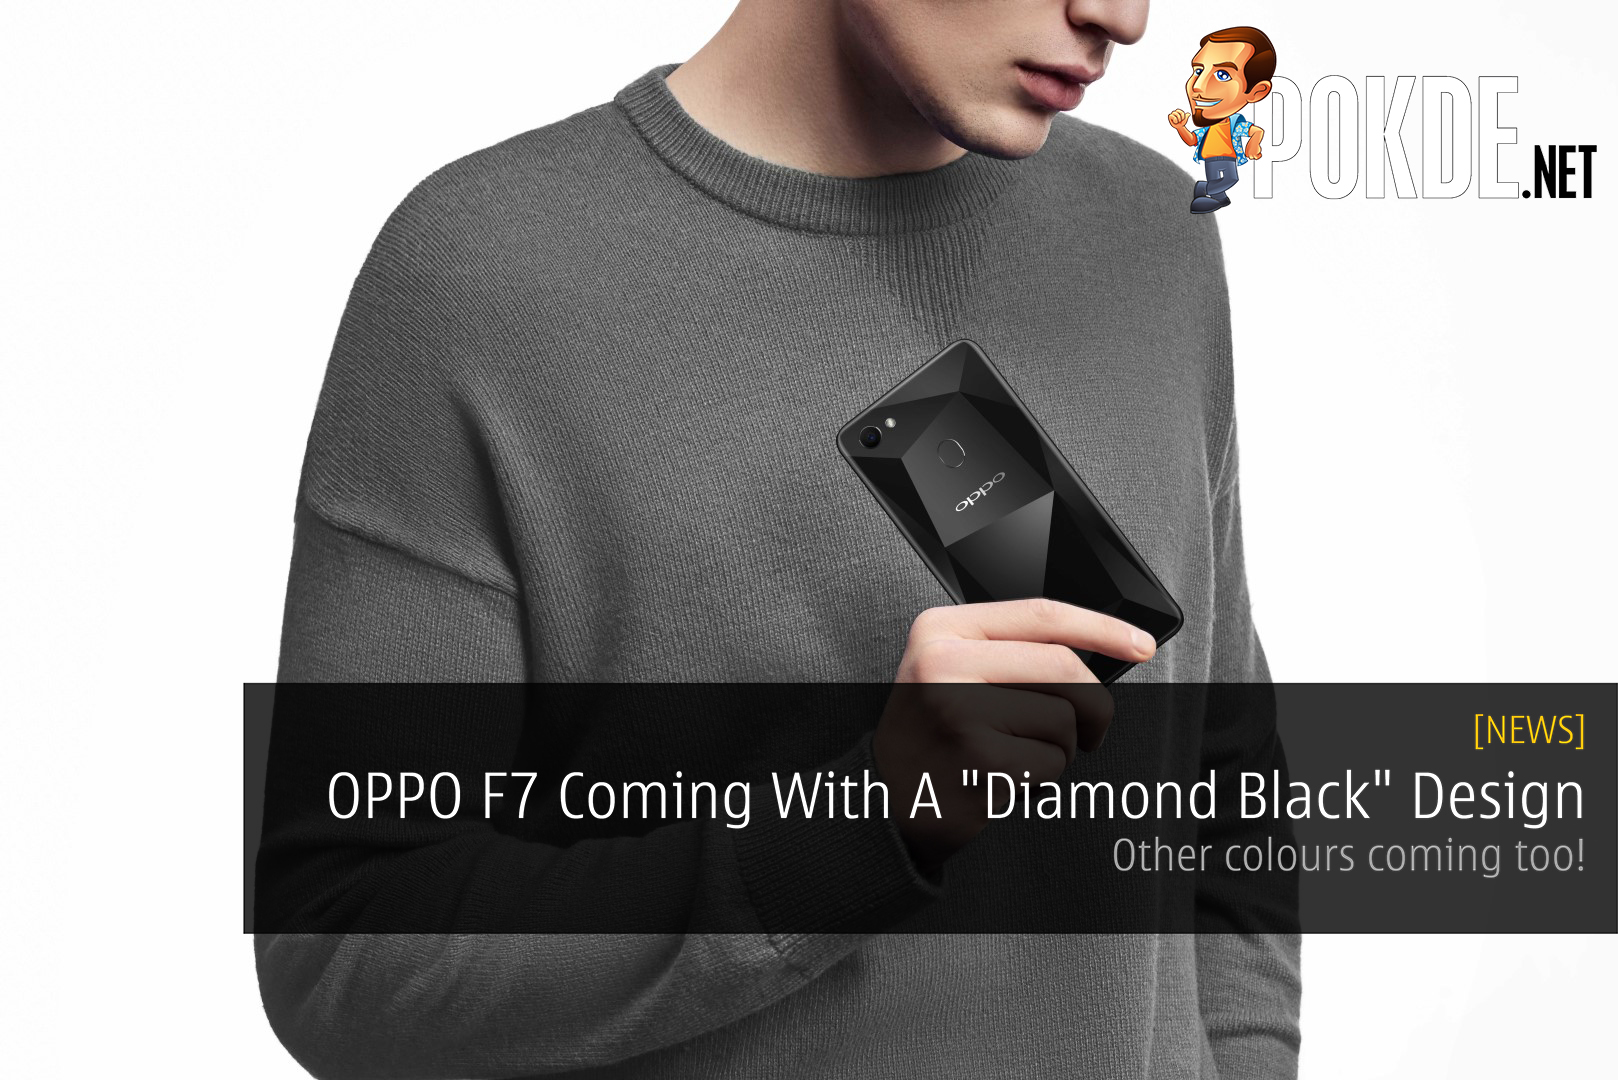 OPPO F7 Coming With A "Diamond Black" Design - Other colours coming too! 24